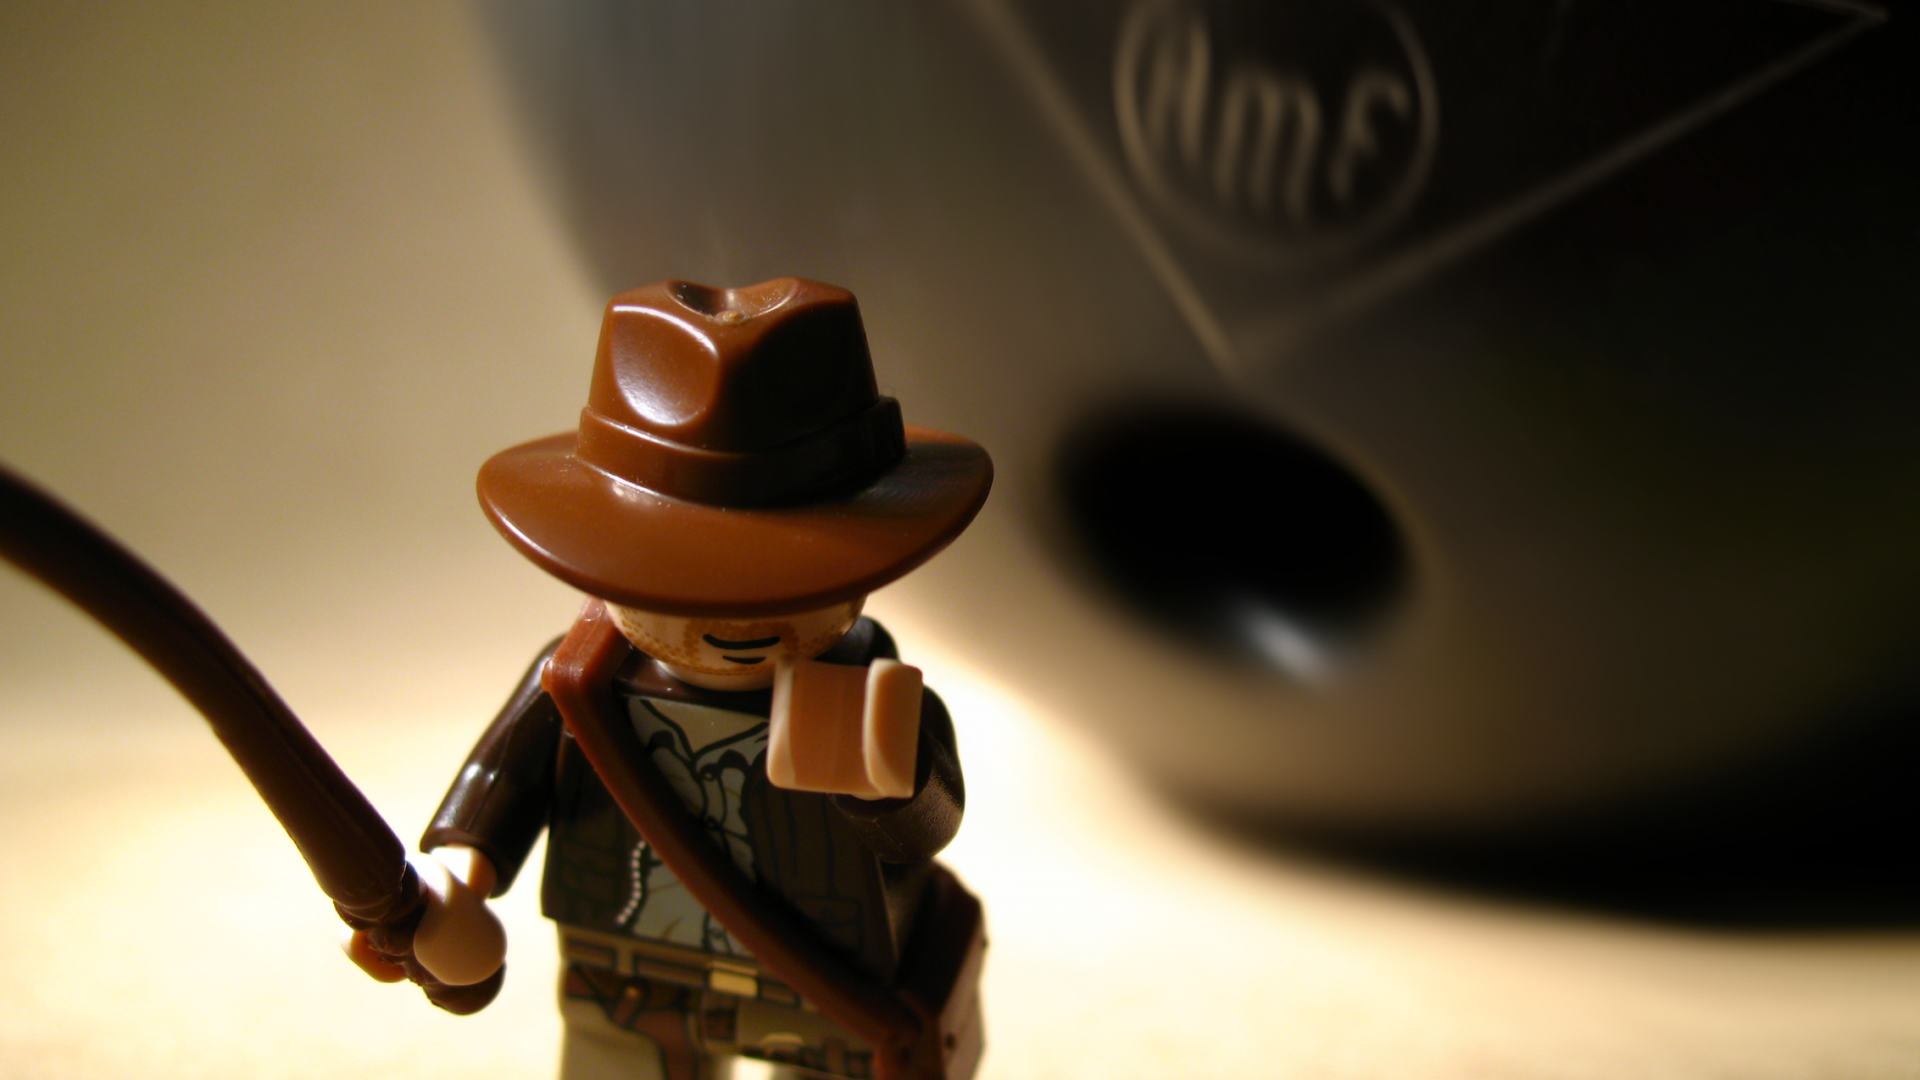 Free download View Full Size More lego indiana jones wallpaper [2265x1700] for your Desktop, Mobile & Tablet. Explore LEGO Indiana Jones Wallpaper. LEGO Indiana Jones Wallpaper, Indiana Jones Wallpaper